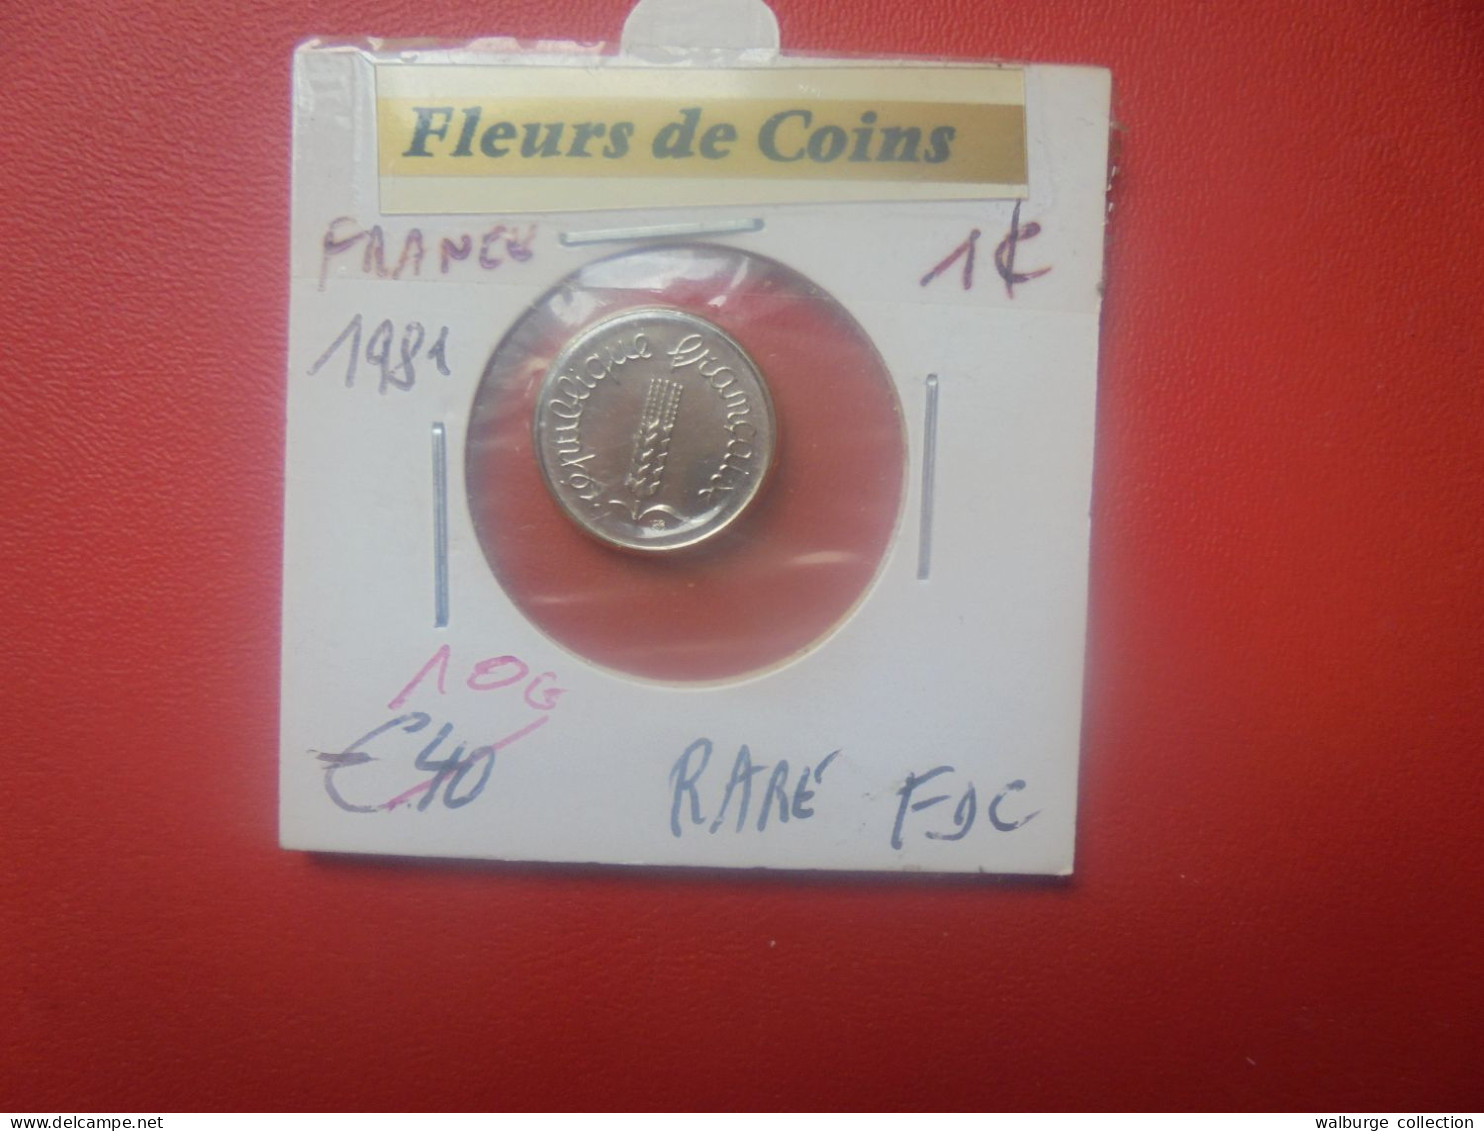 FRANCE 1 Centime 1981 ASSEZ RARE FDC (A.1) - 1 Centime